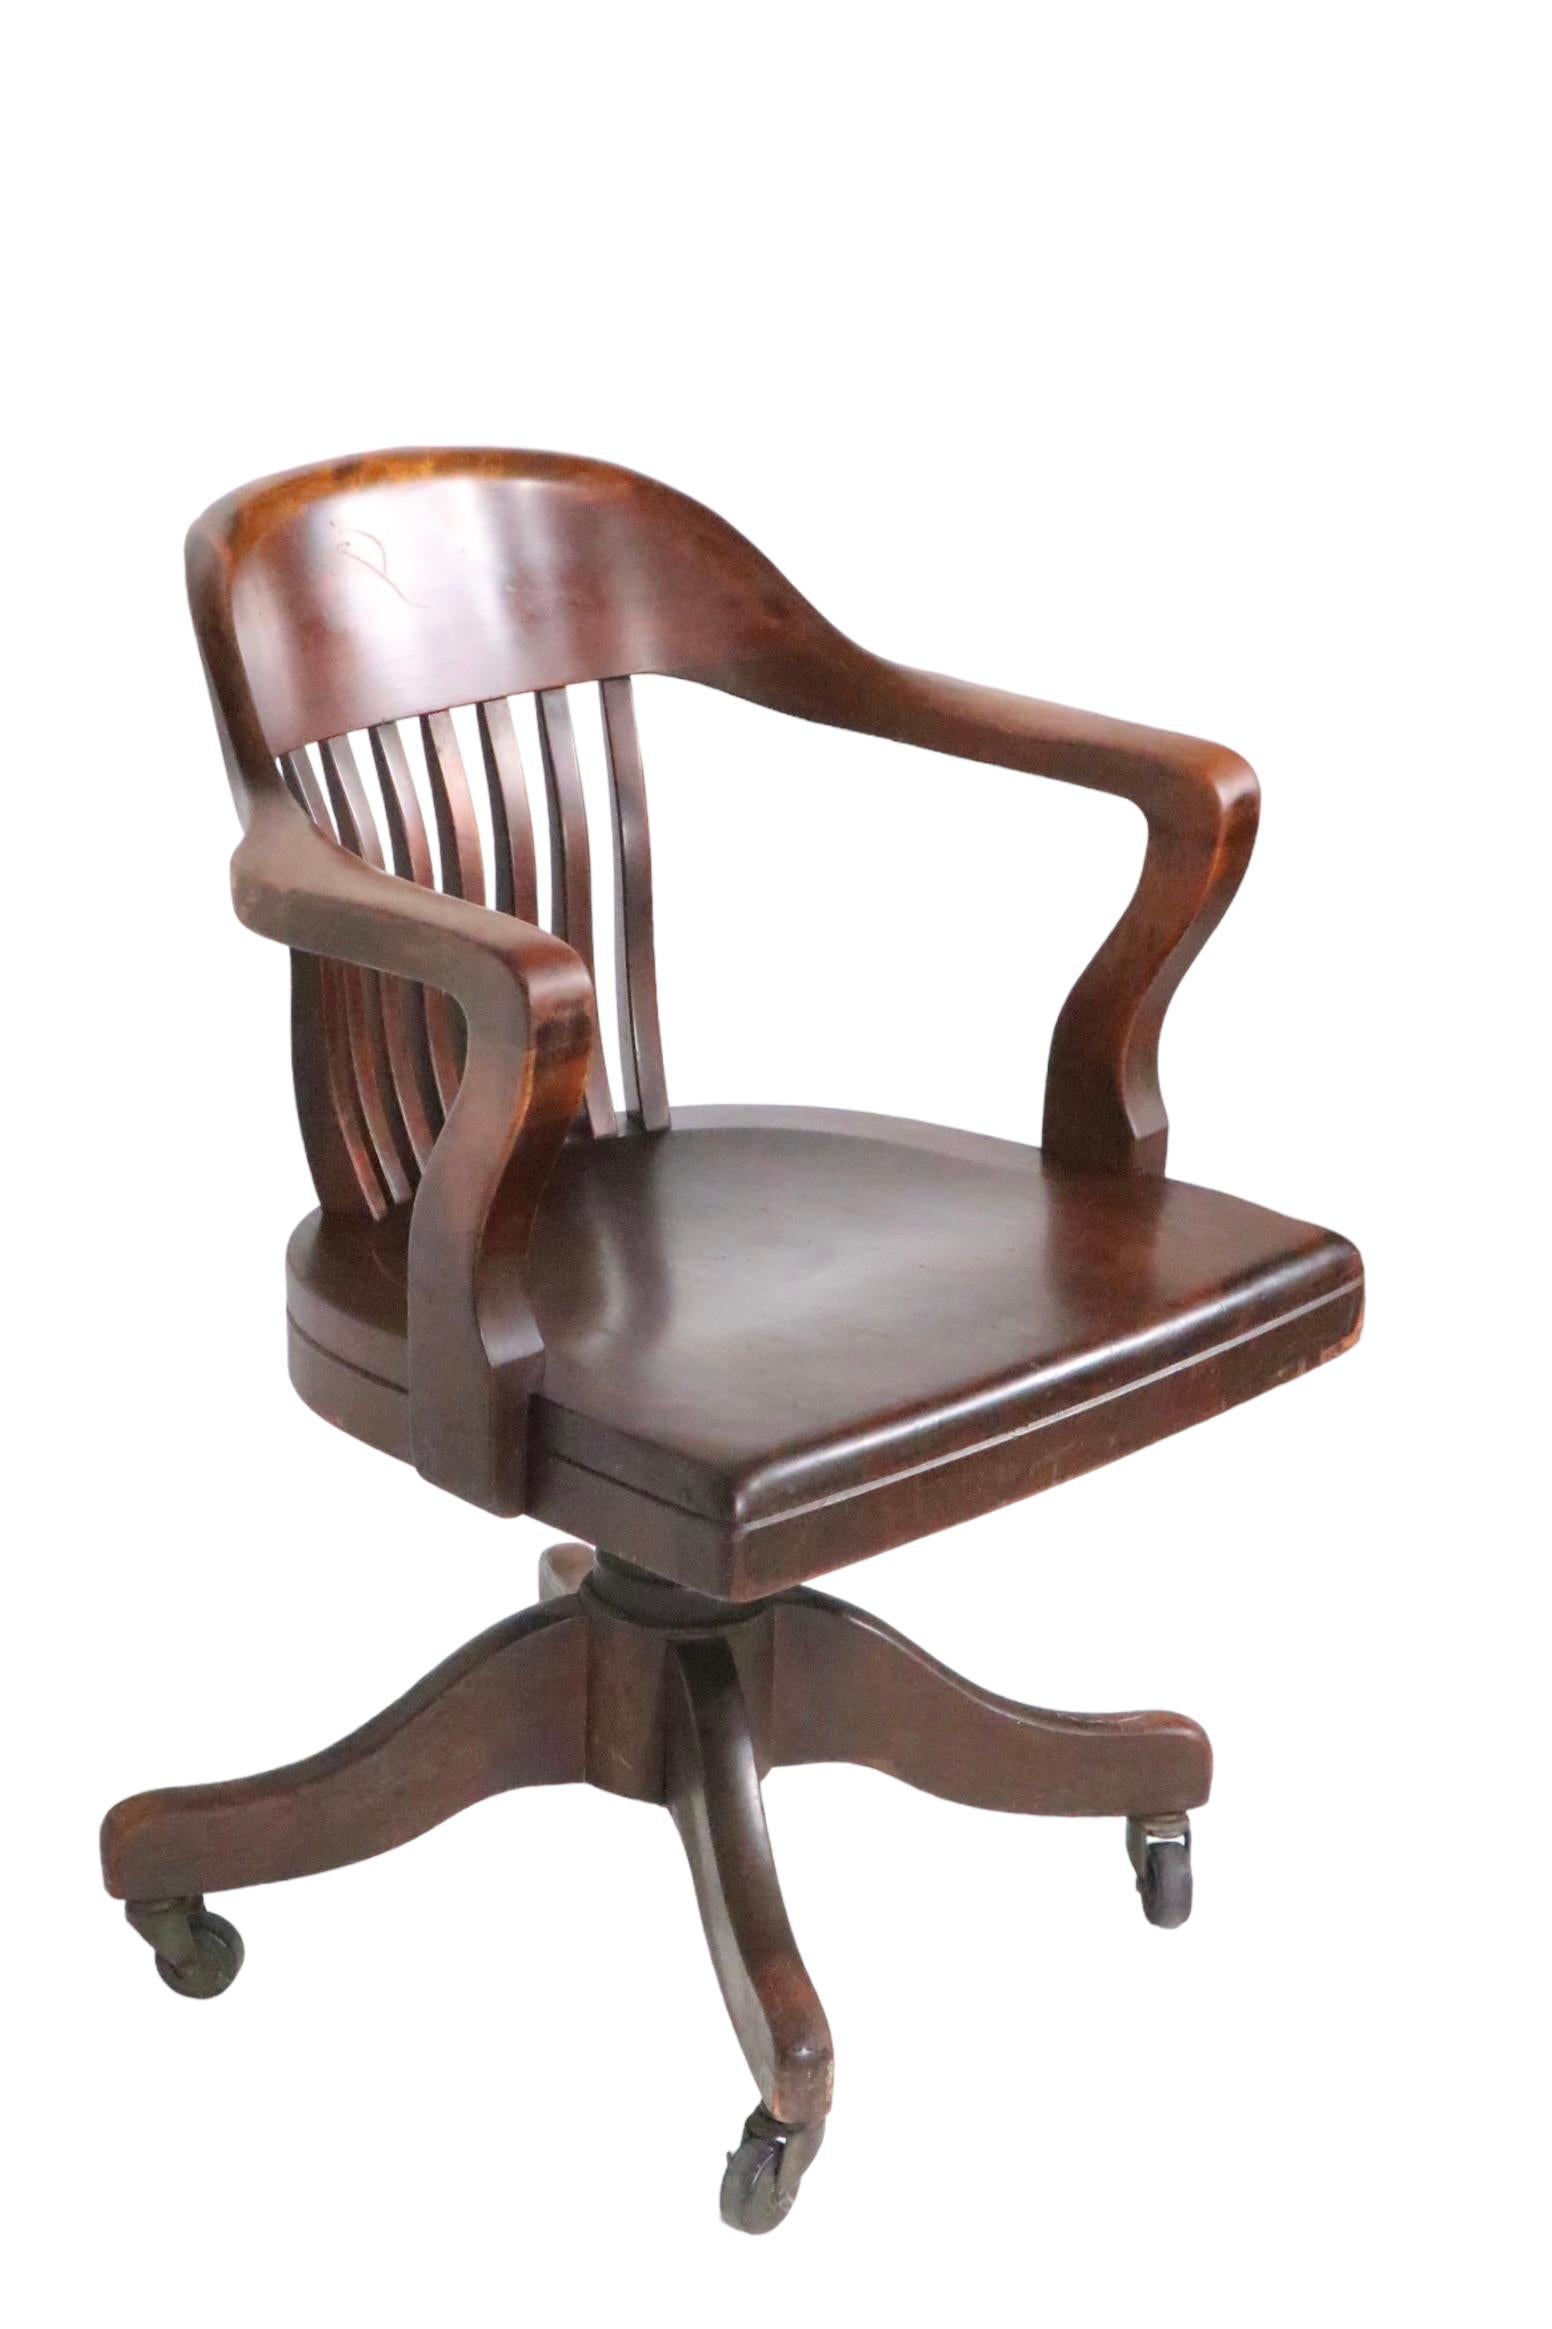 Bank of England Jury Style Swivel Desk Chair by Marble Chair Company c 1920/1930 6